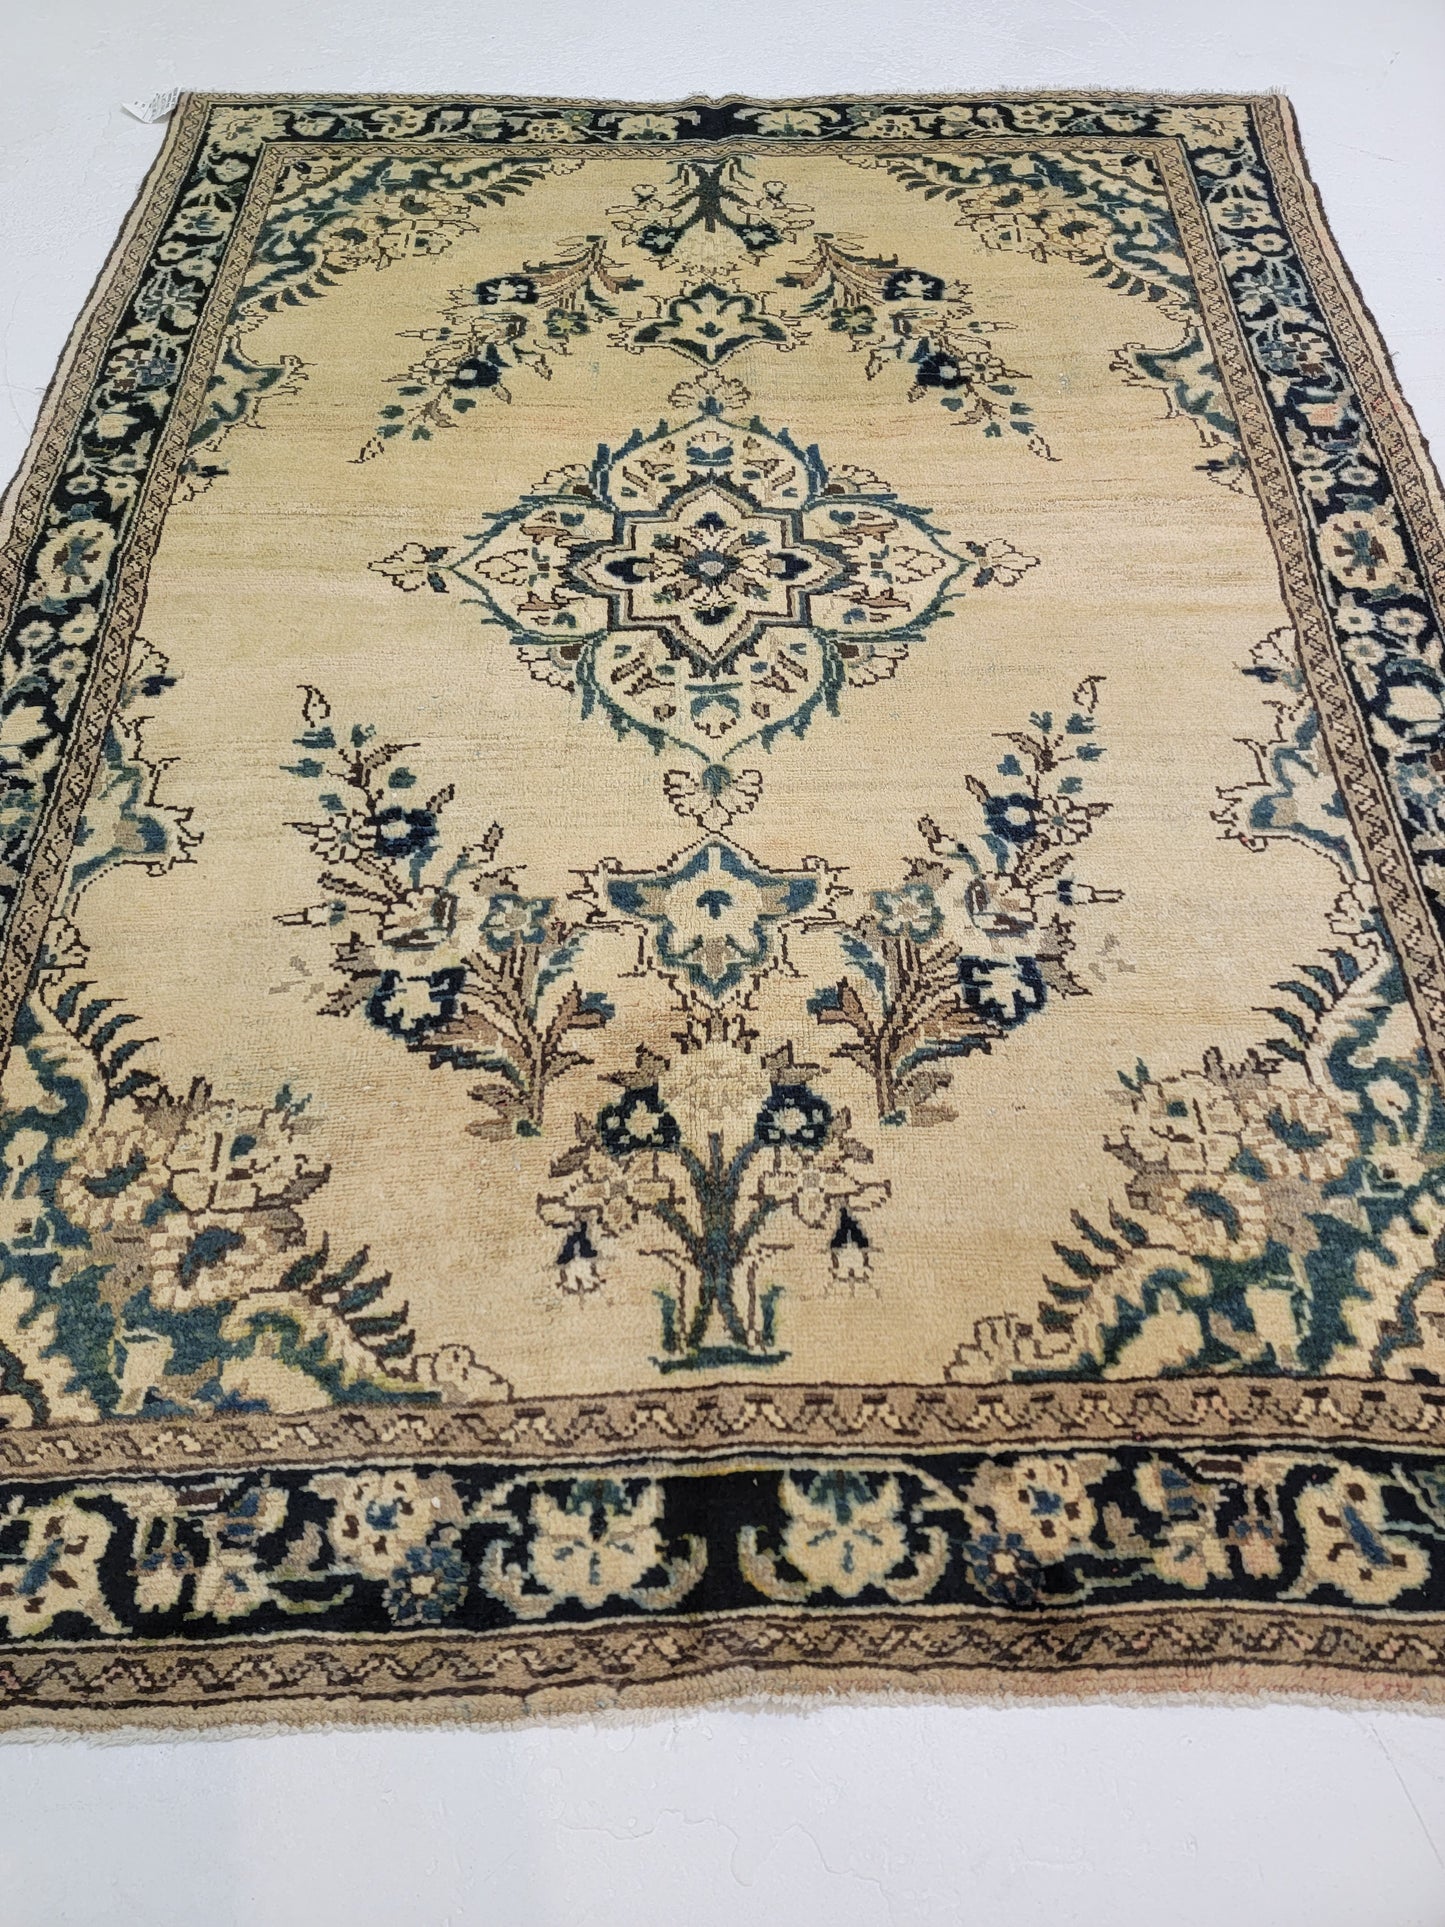 Antique Hand-Knotted Wool Area Rug Armenian Lillian 4'10" x 6'5"